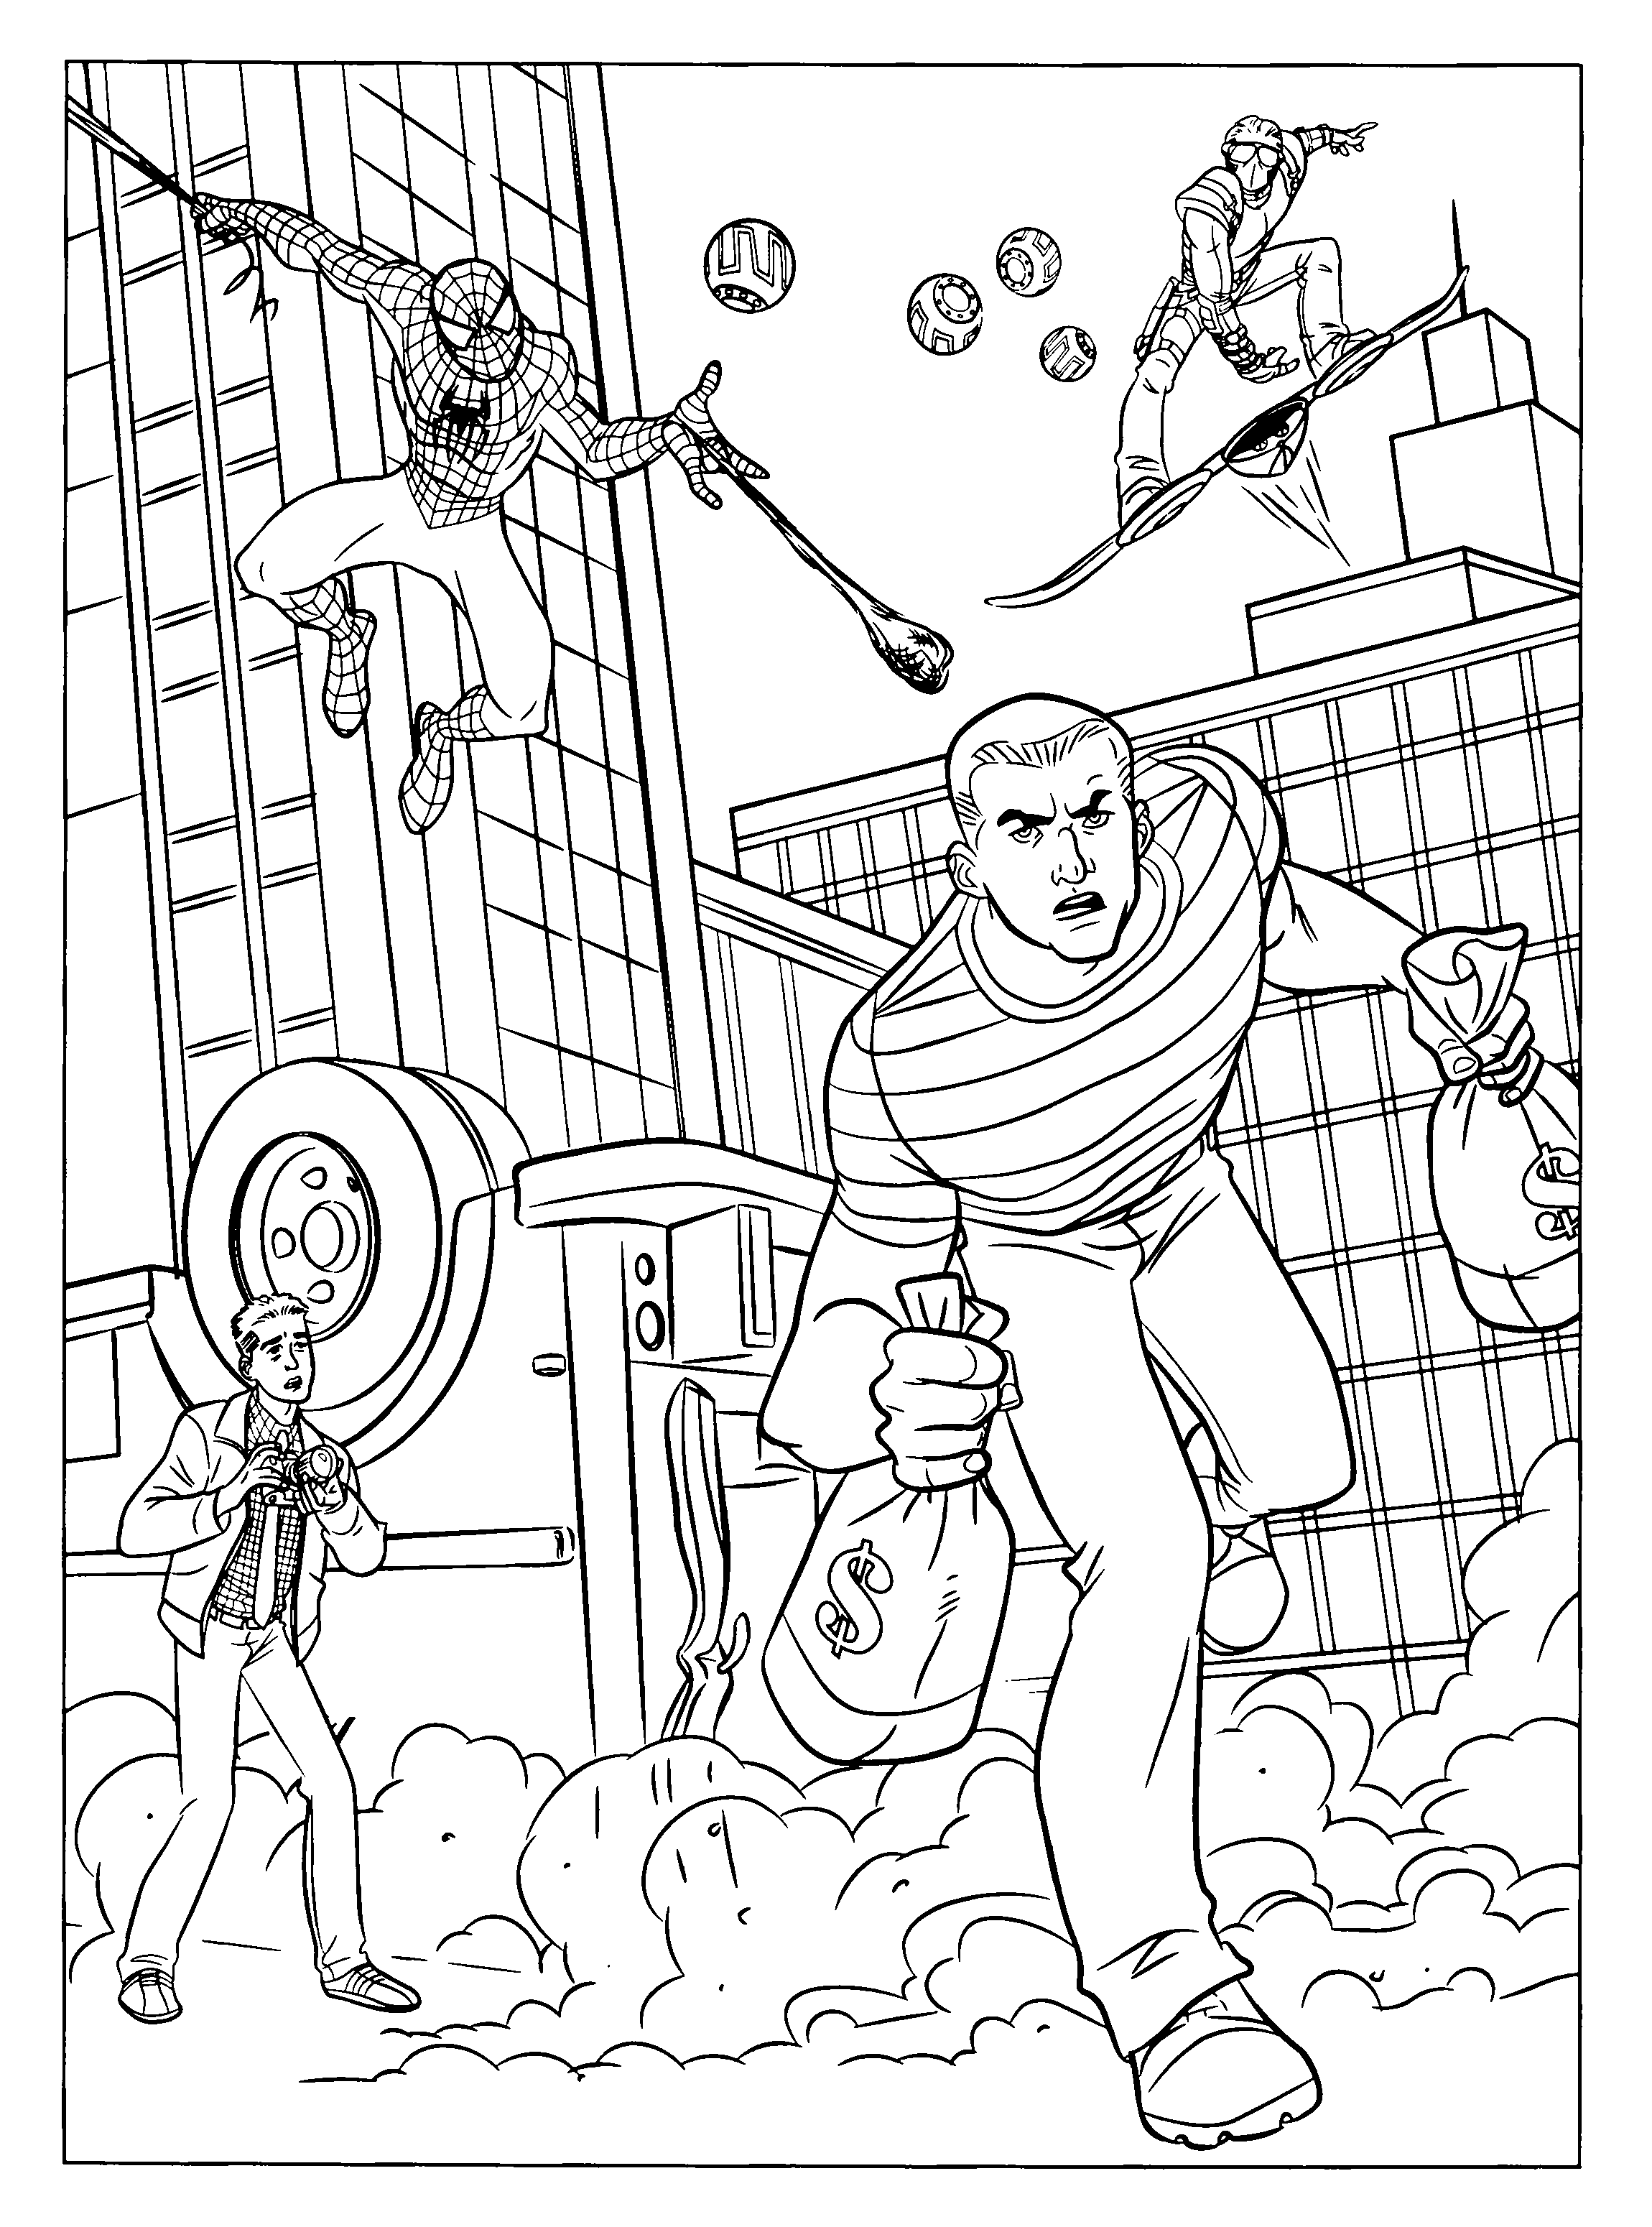 Spiderman Coloring pages Kids coloring pages Free coloring pages